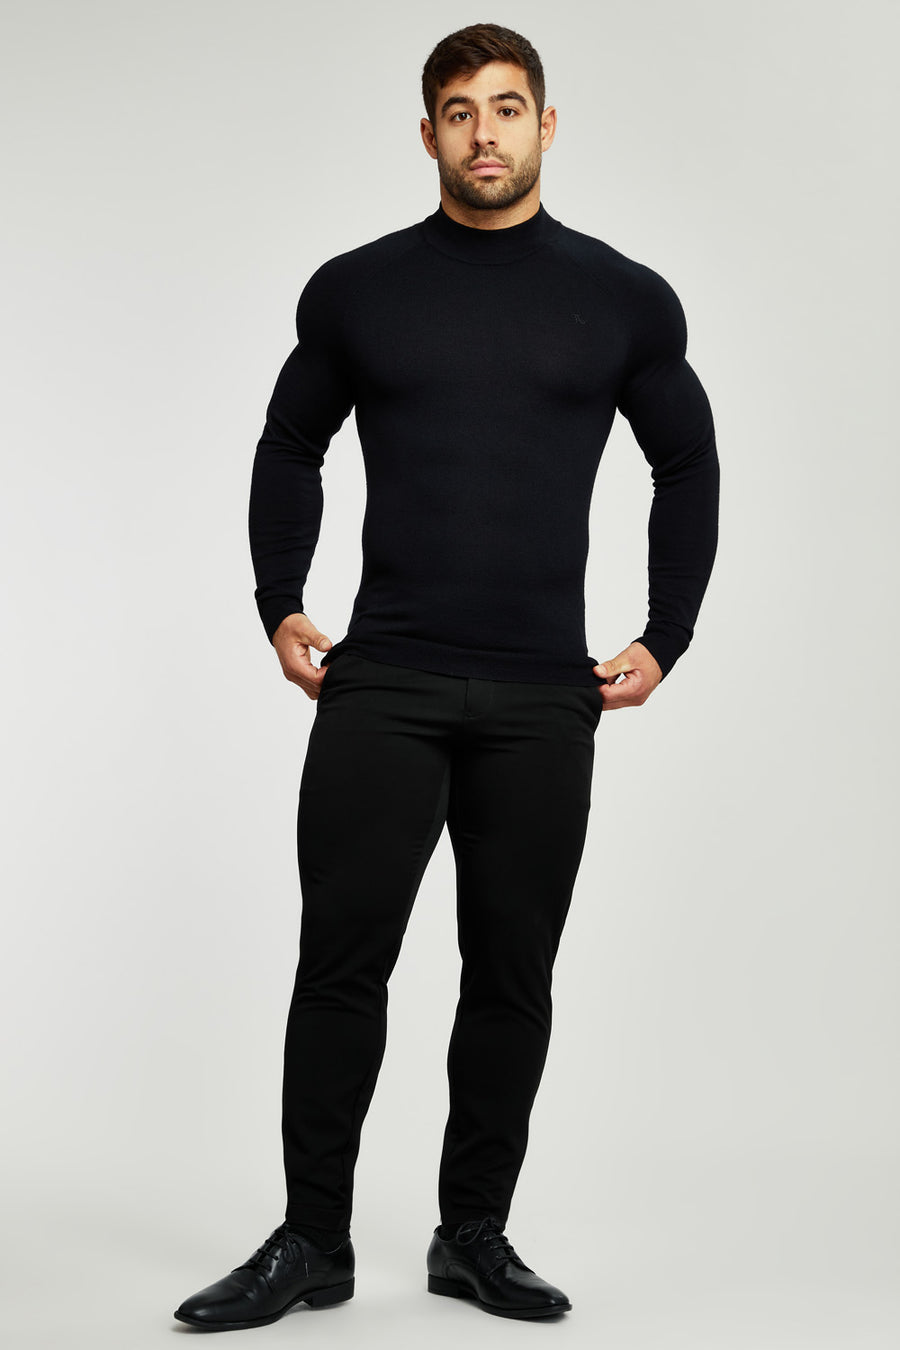 Athletic Fit Knitwear - TAILORED ATHLETE